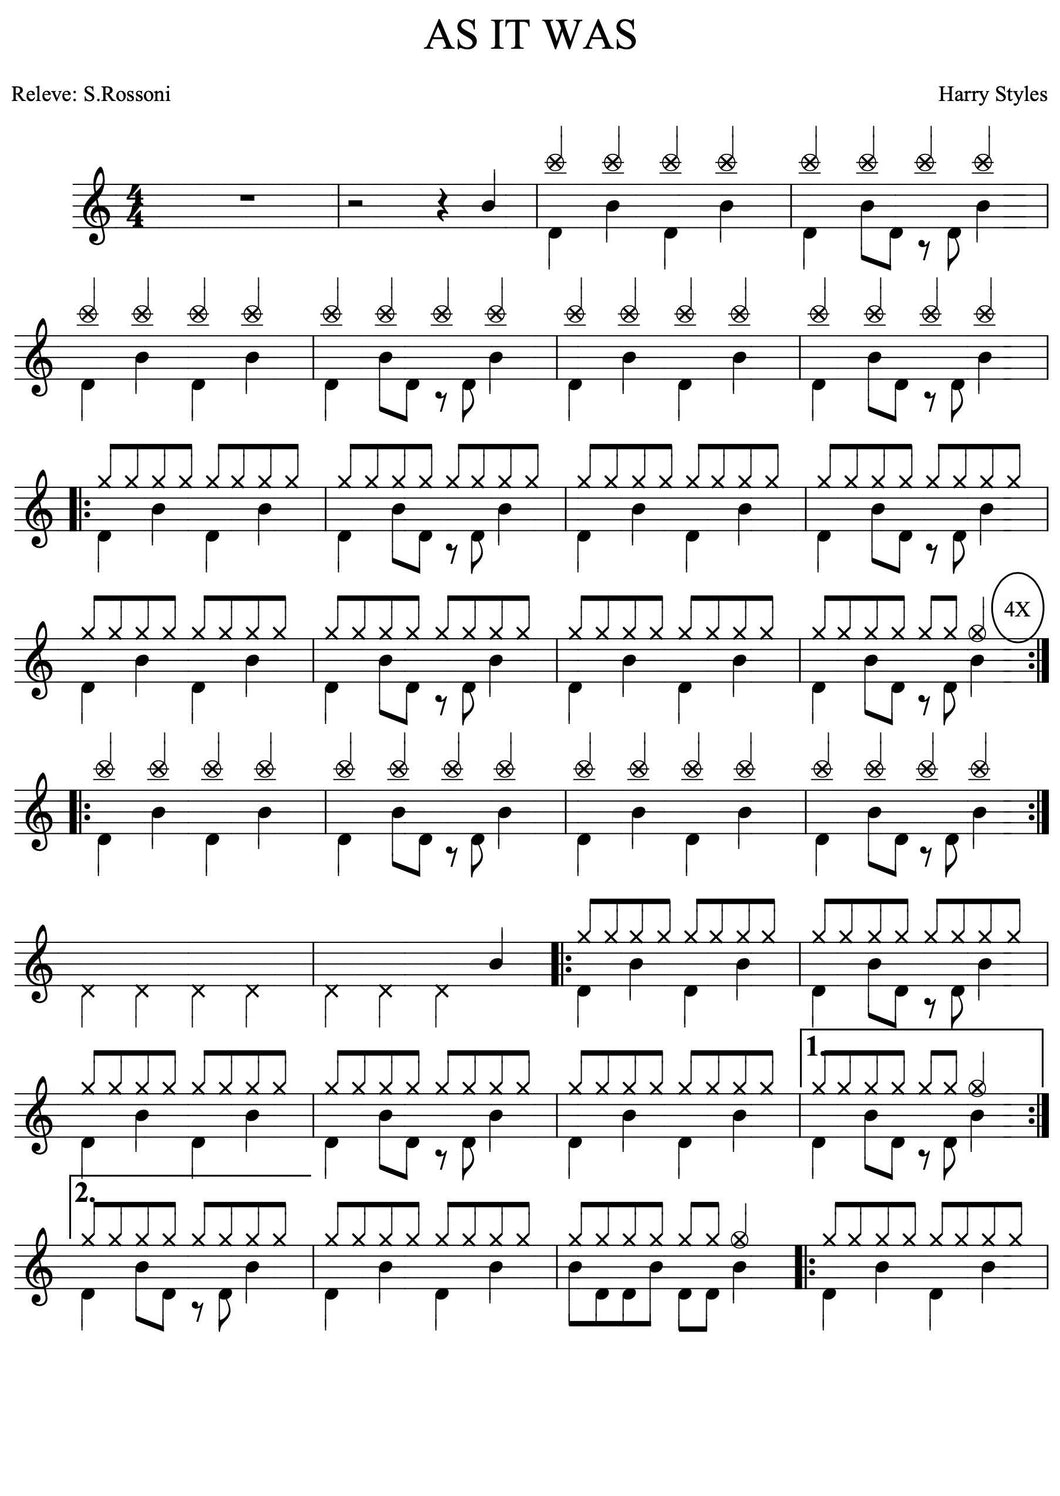 As it Was - Harry Styles - Full Drum Transcription / Drum Sheet Music - Rossoni